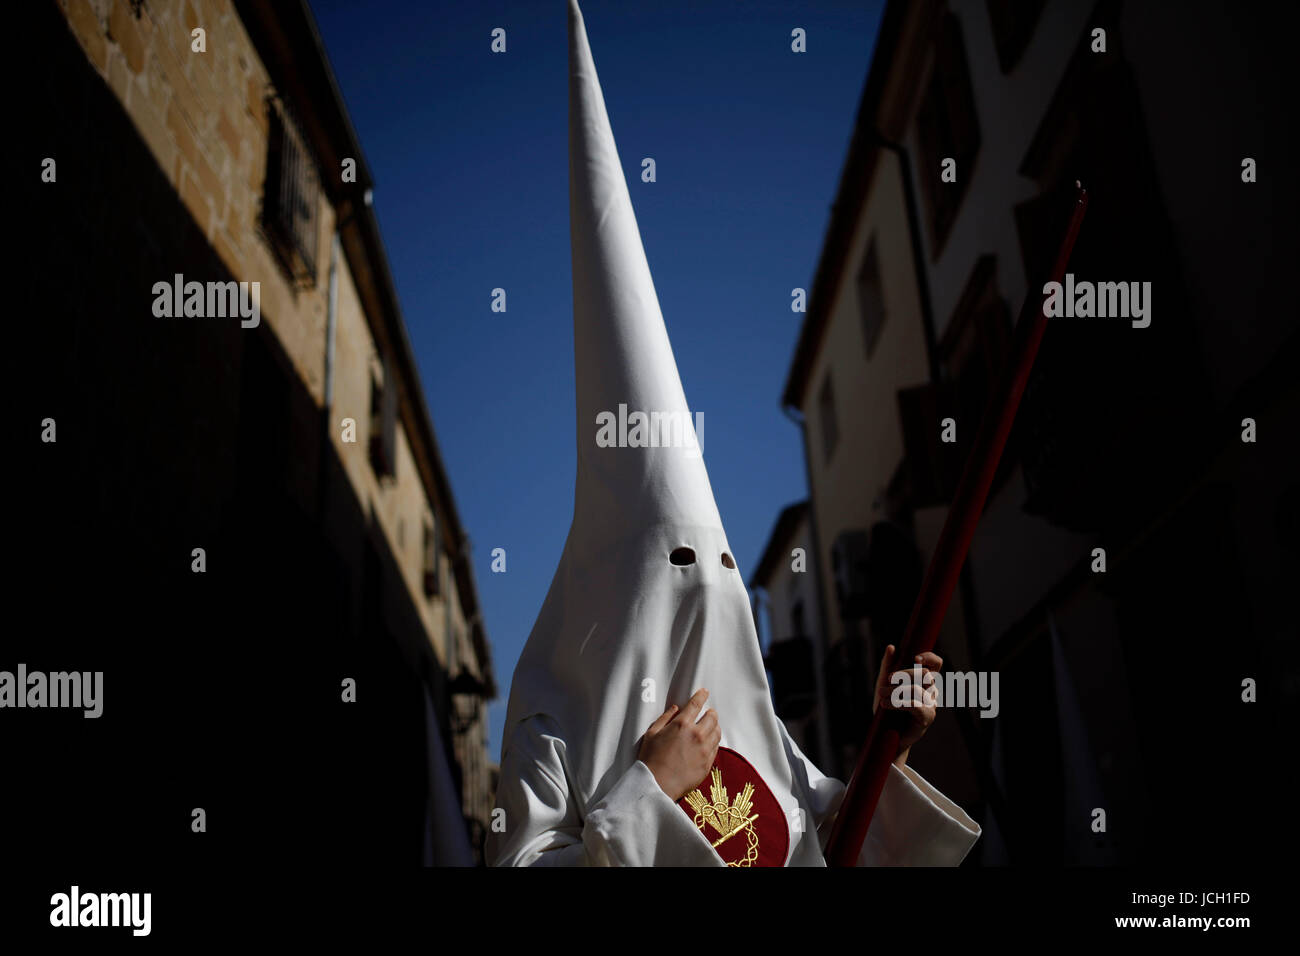 A penitente wearing a white pointer hood during Easter Week celebrations in Baeza, Jaen Province, Andalusia, Spain Stock Photo